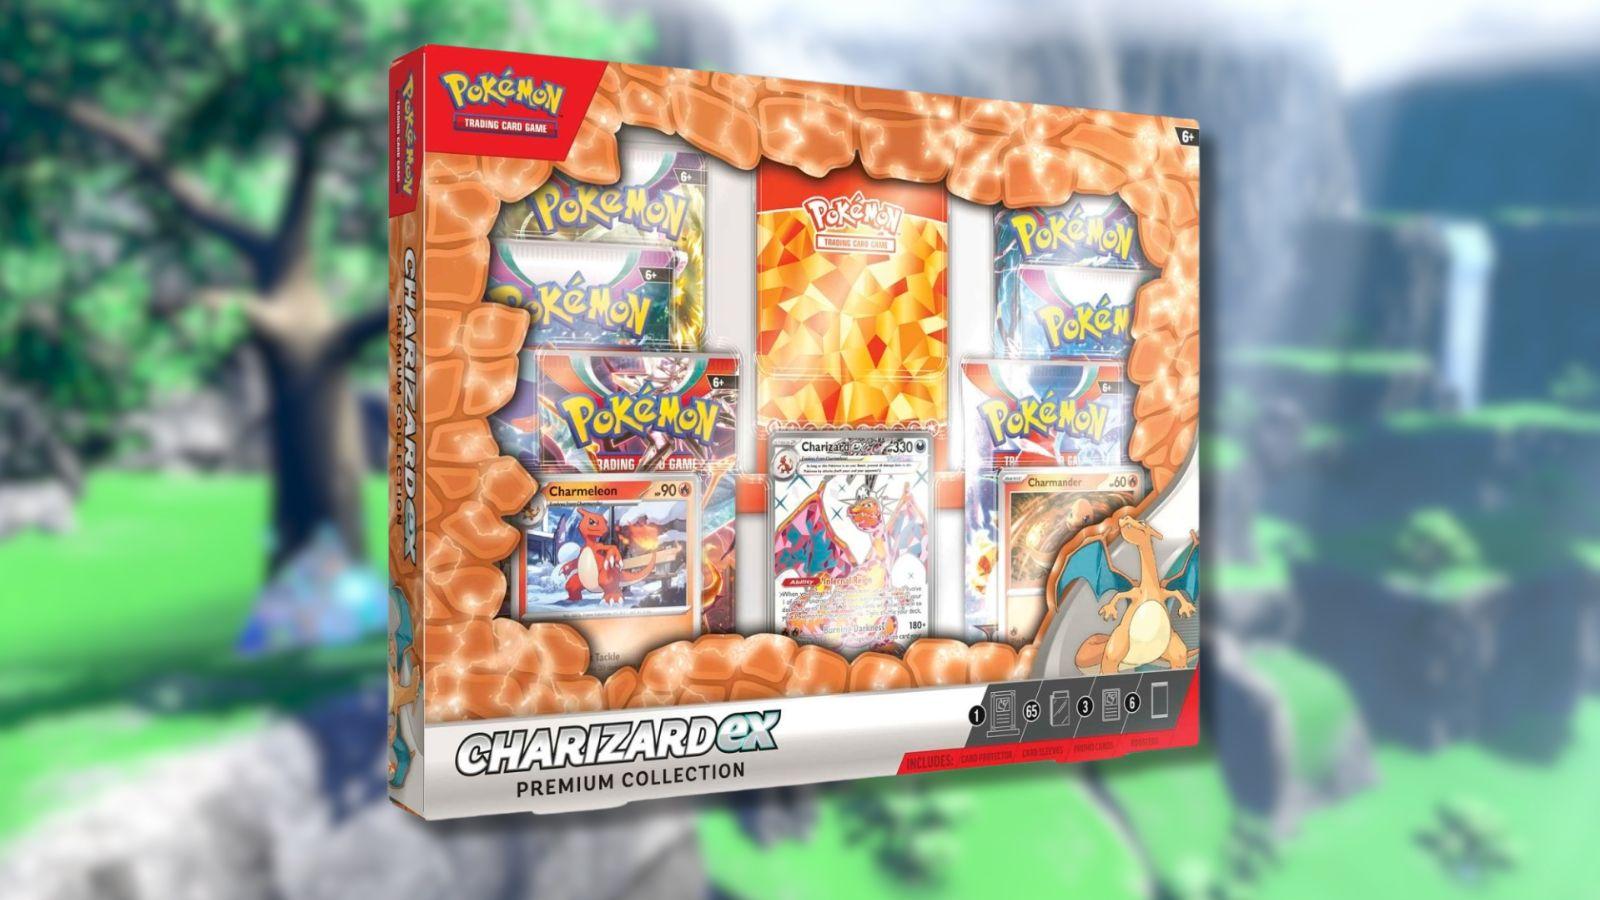 Charizard ex Premium Collection product photo with game background.